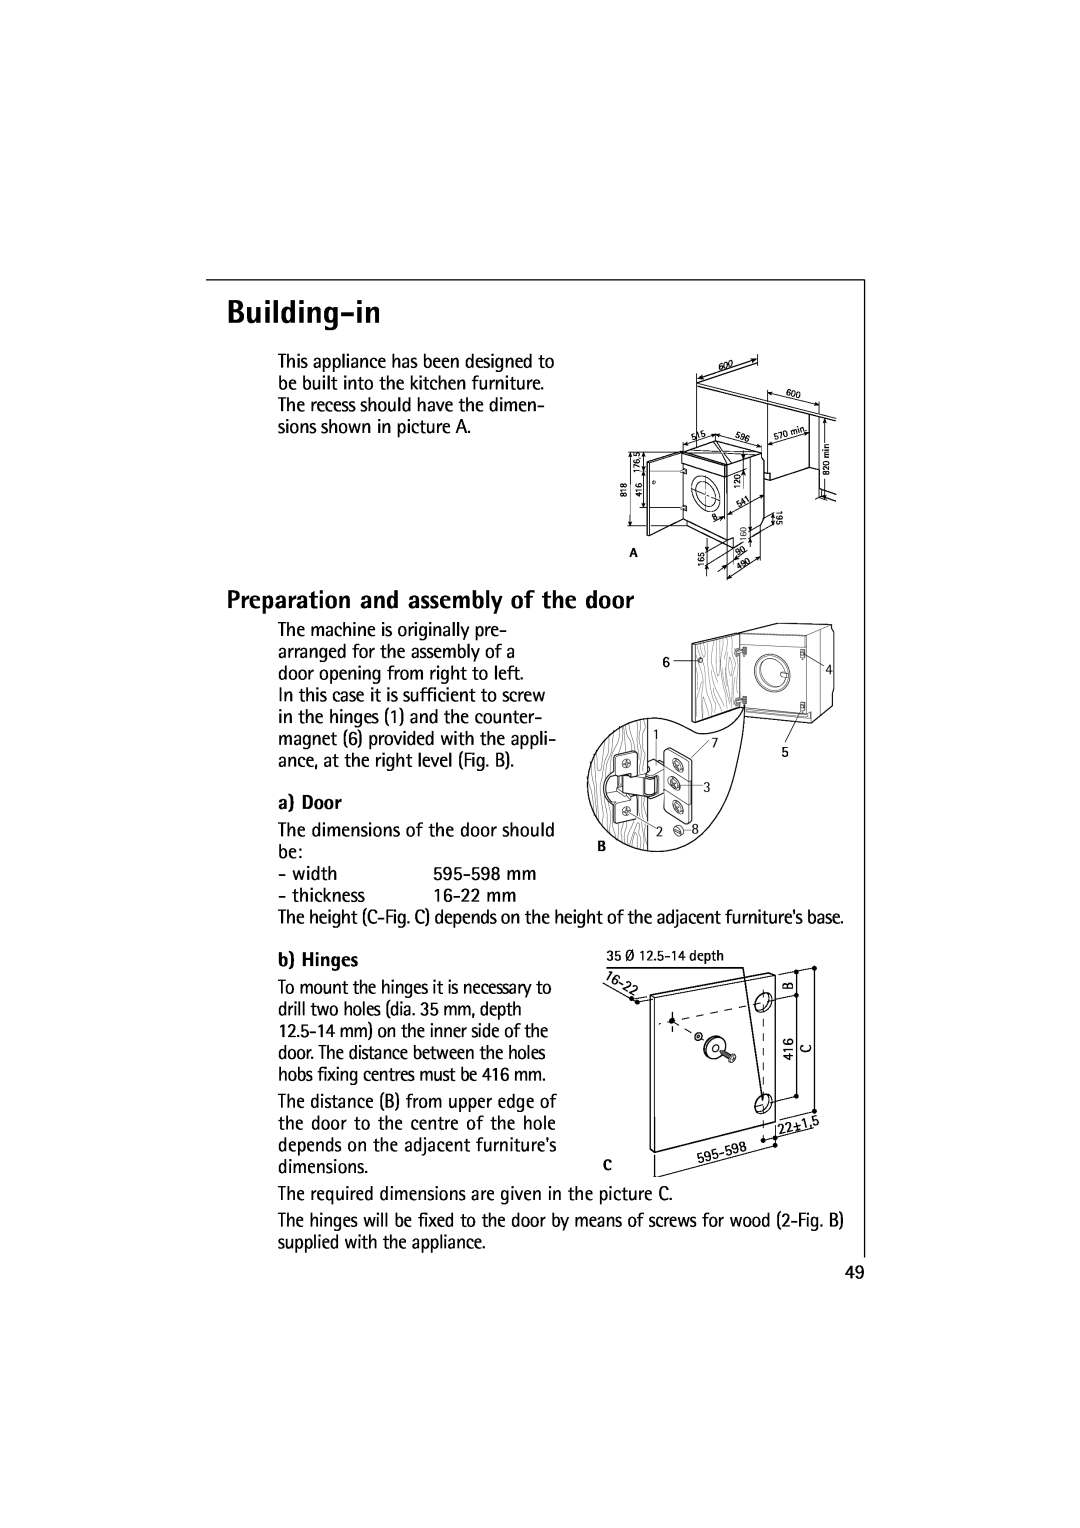 Electrolux 10500 VI manual Building-in, Preparation and assembly of the door, a Door, b Hinges 